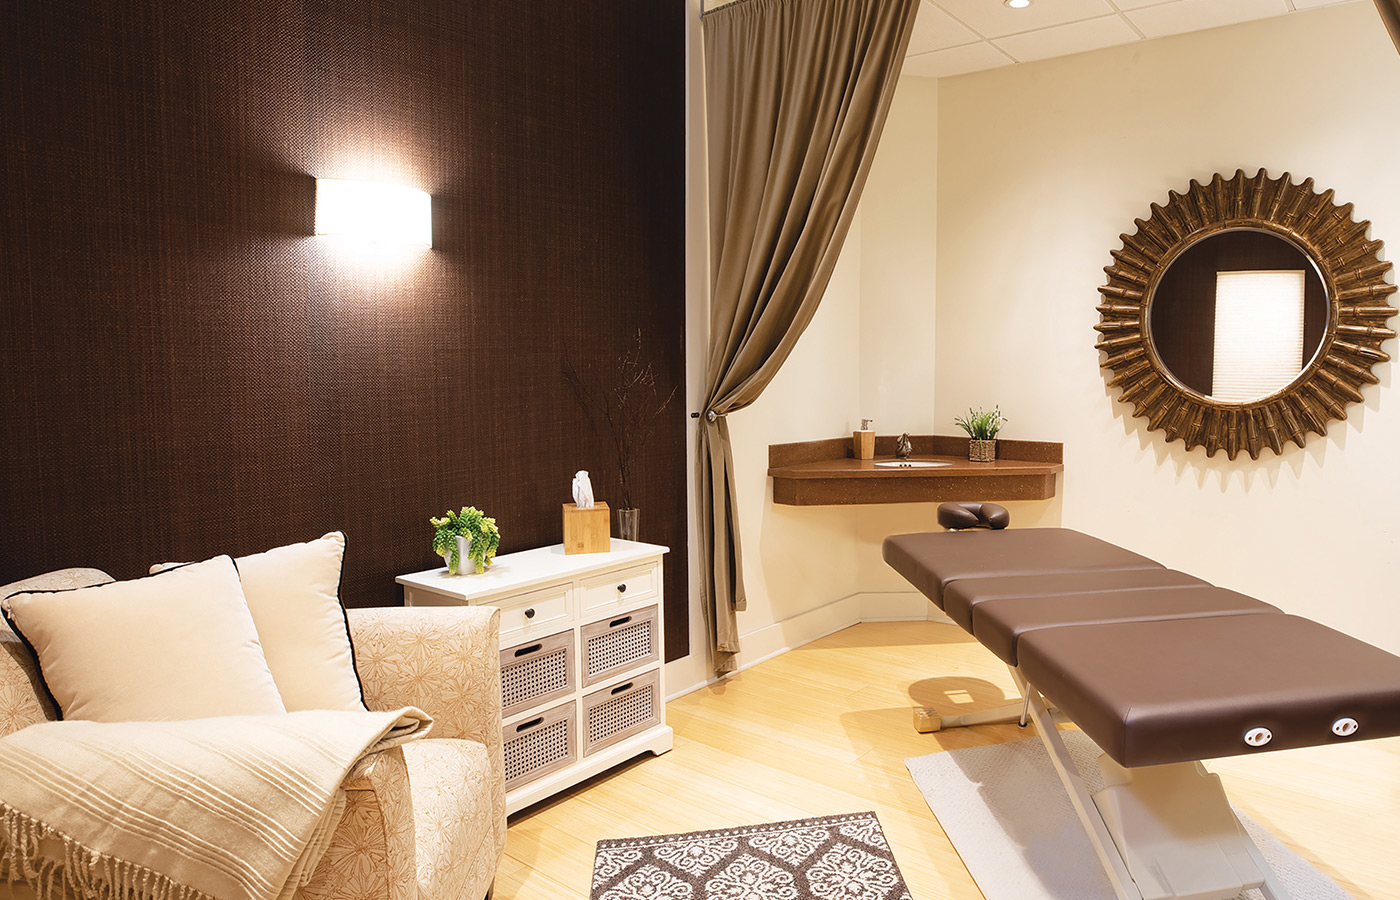 The massage room at The Watermark at East Hill.